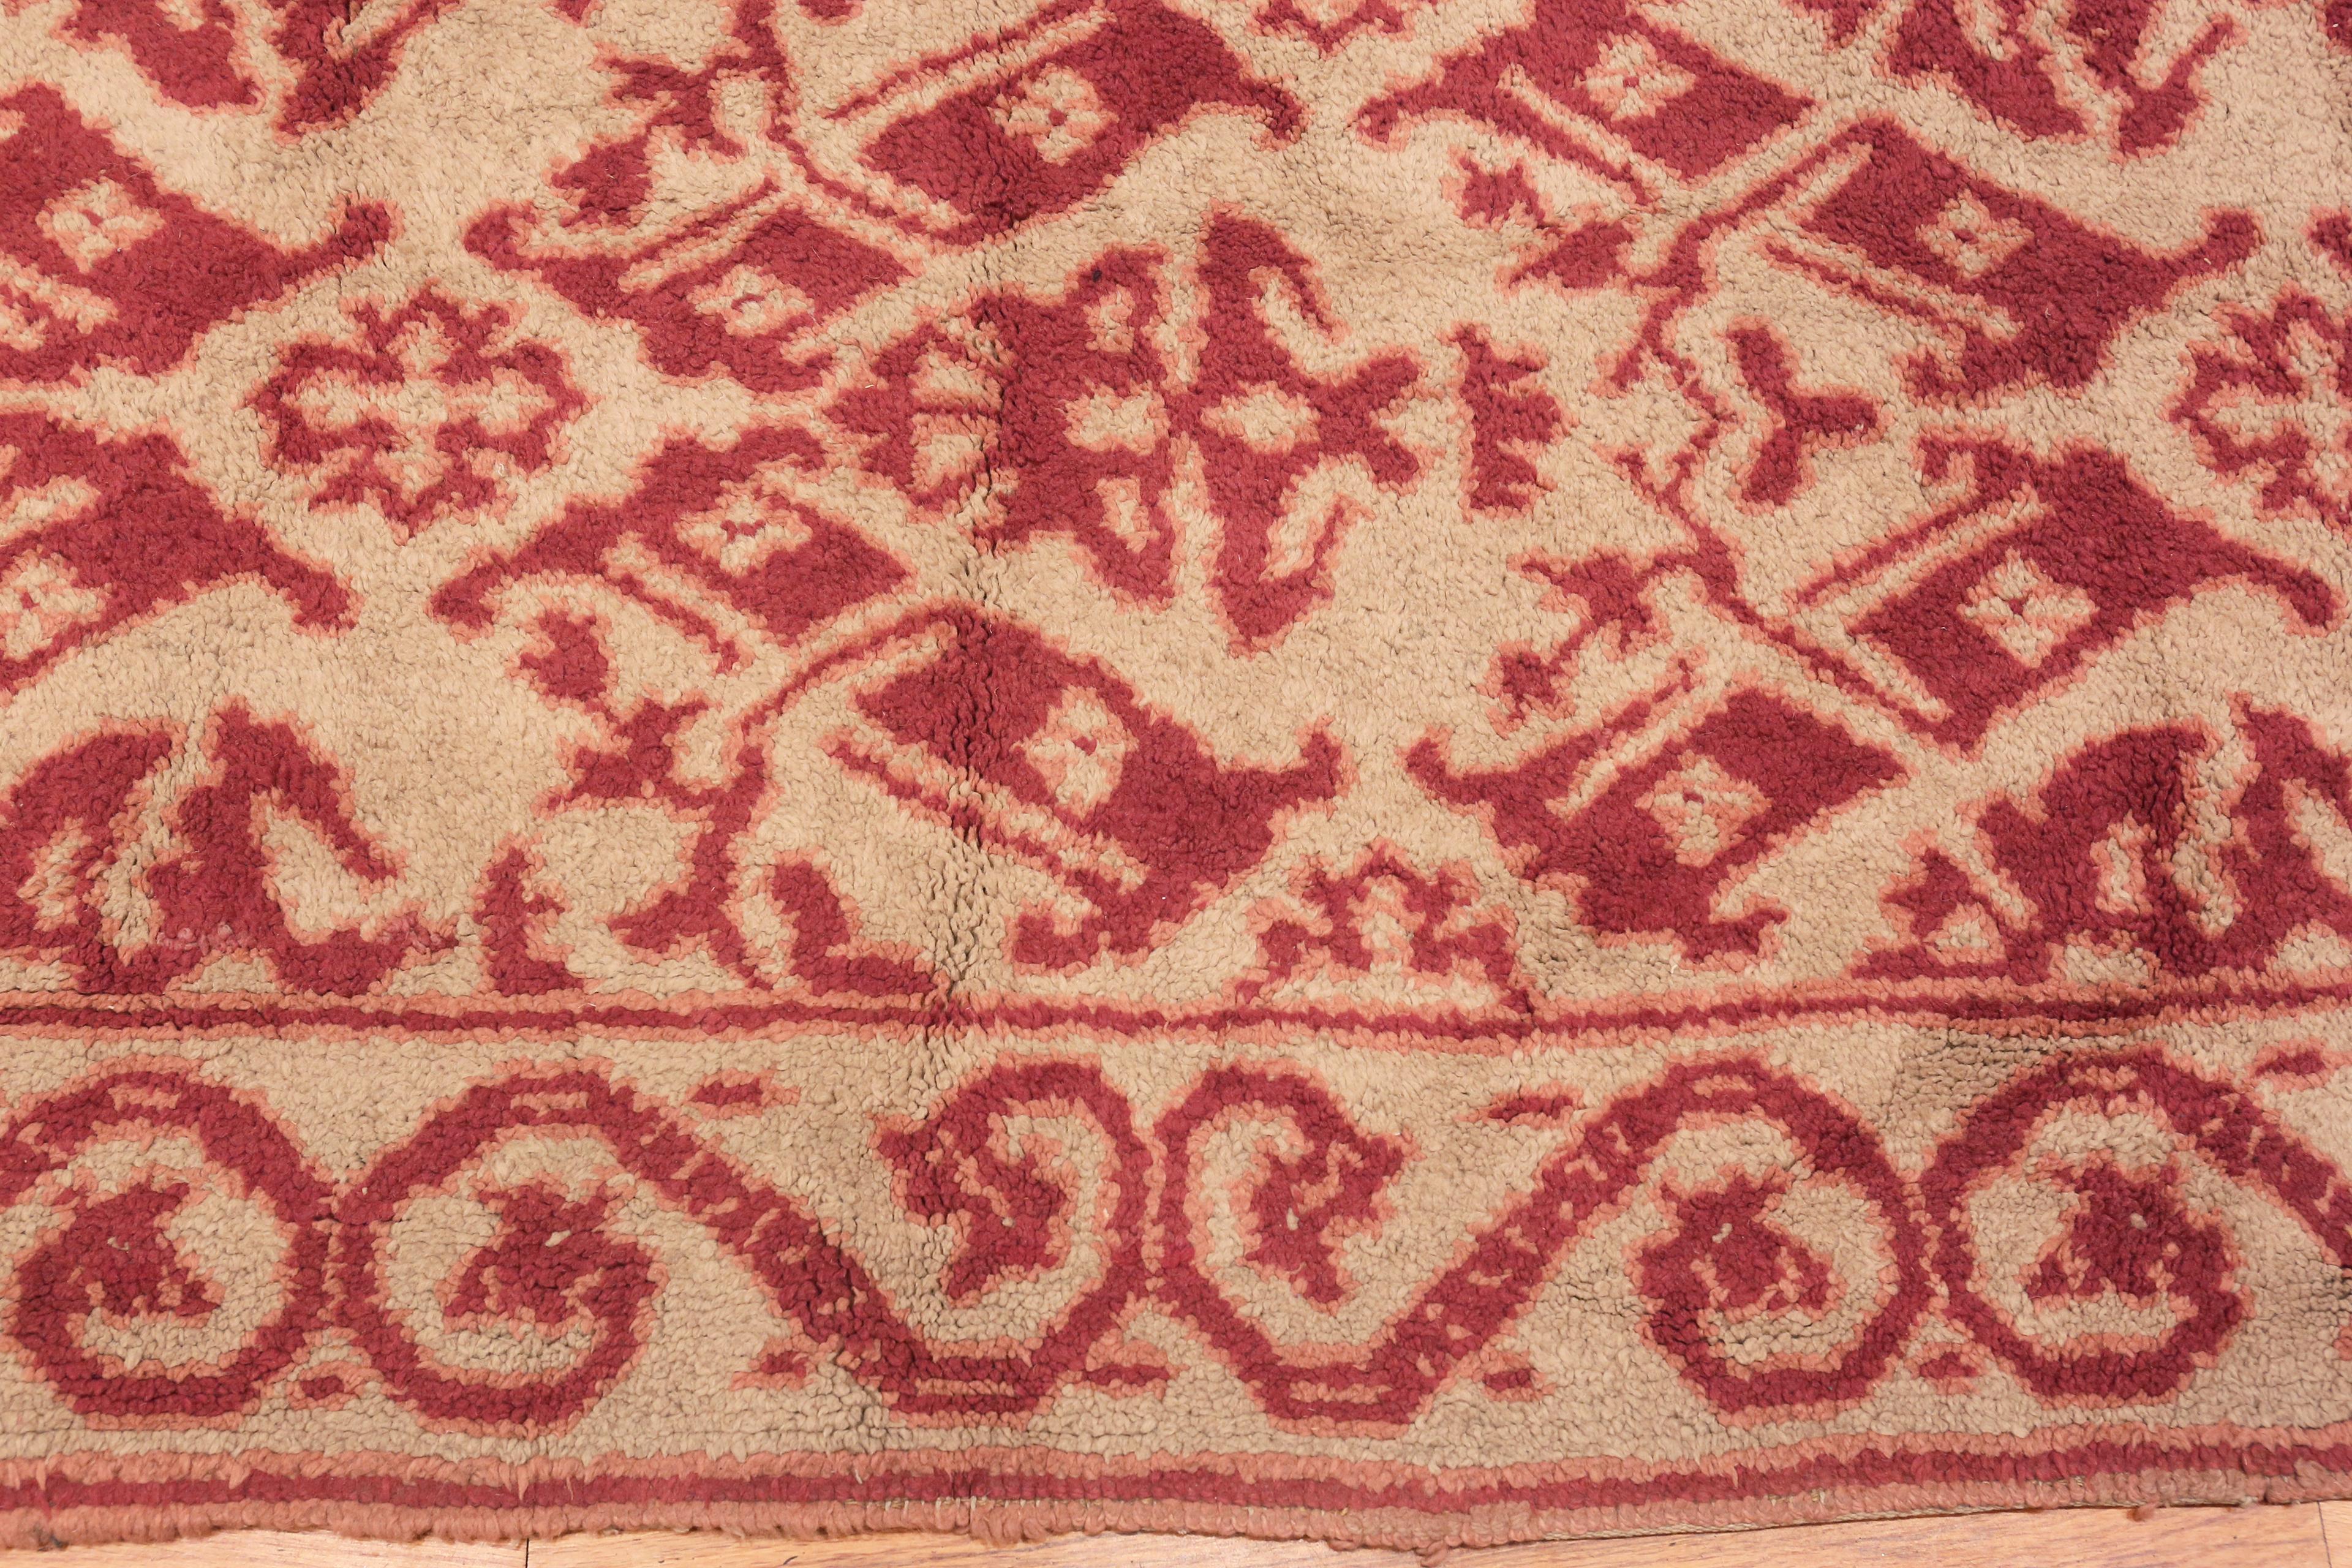 Beautiful Large Size Vintage Spanish Rug, Country of Origin: Spain, Circa Date: Mid 20th Century - Size: 13 ft 10 in x 17 ft 6 in (4.22 m x 5.33 m).